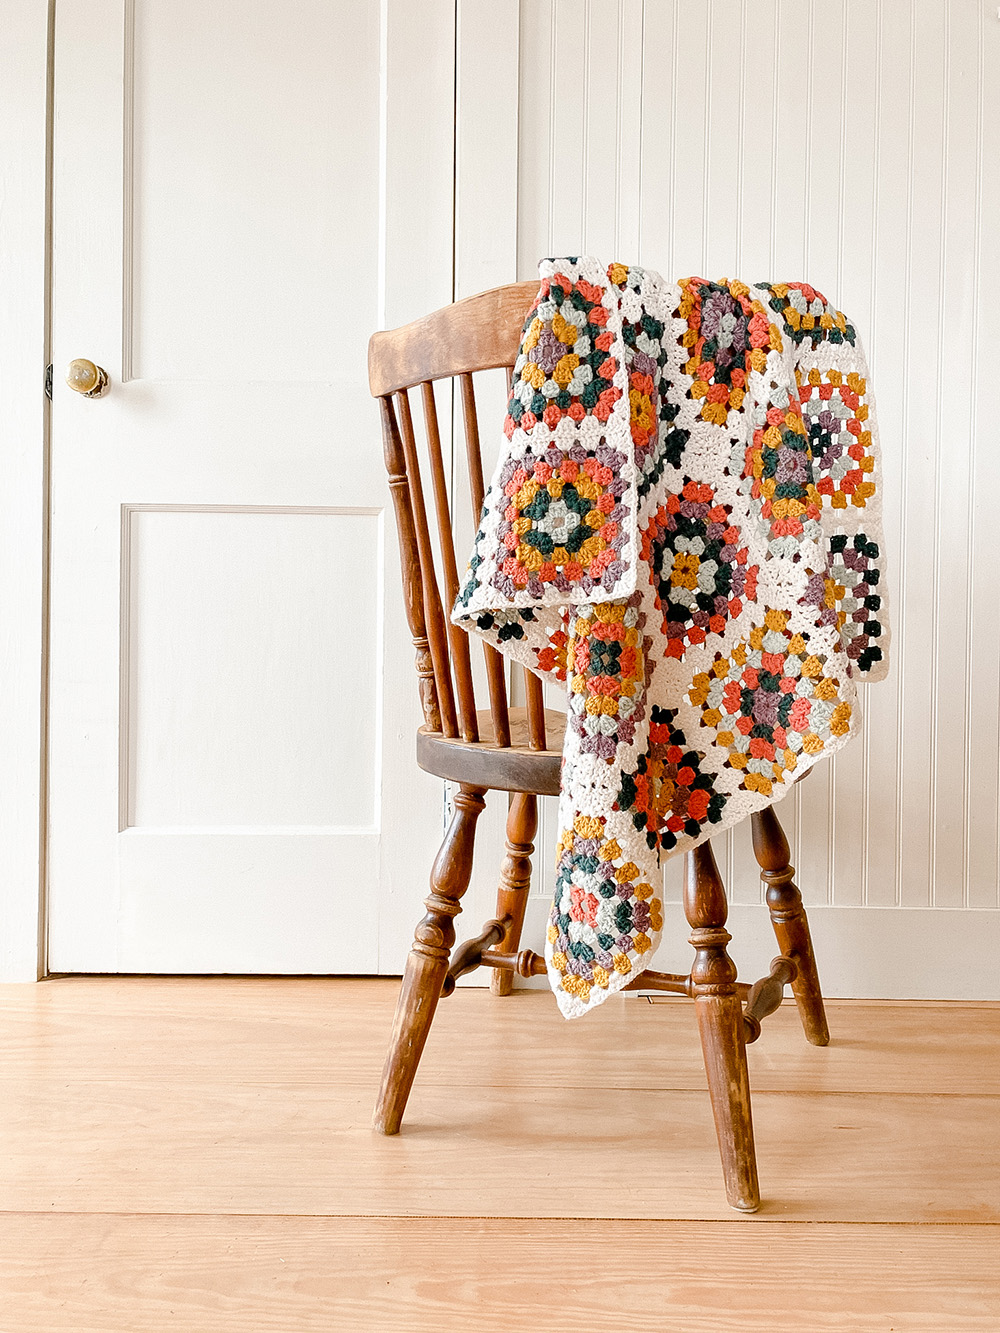 How To Crochet a Unique Granny Square Afghan Blanket - TL Yarn Crafts